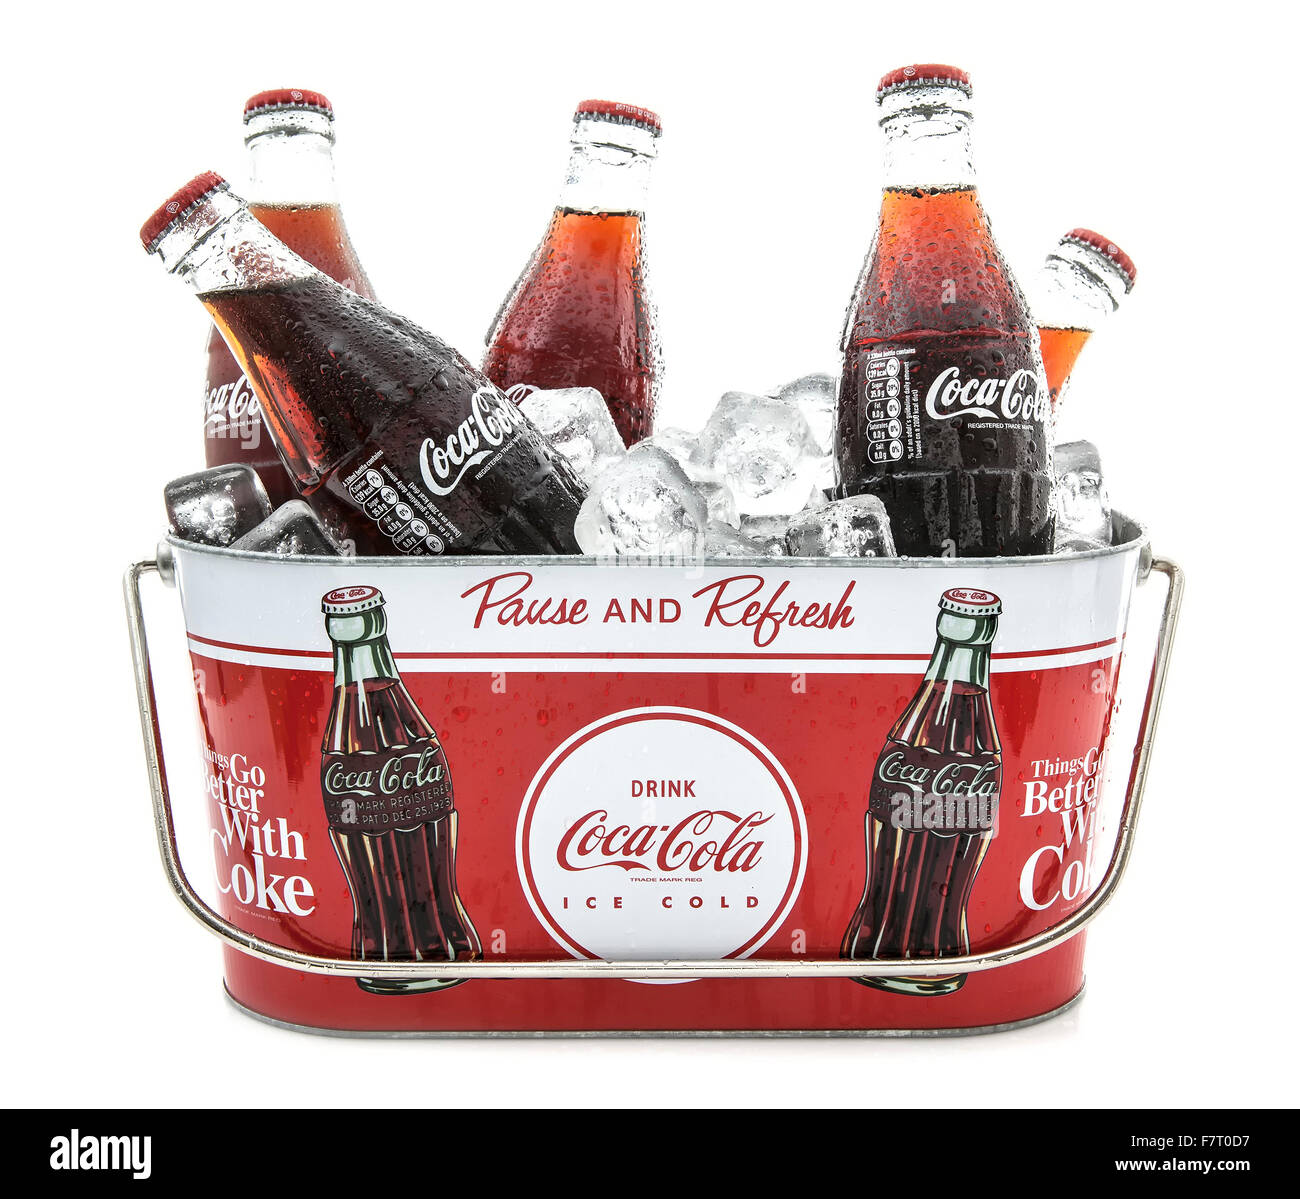 Cold Classic Coke Bottles in a Coca-Cola Ice Bucket on a White Background Stock Photo